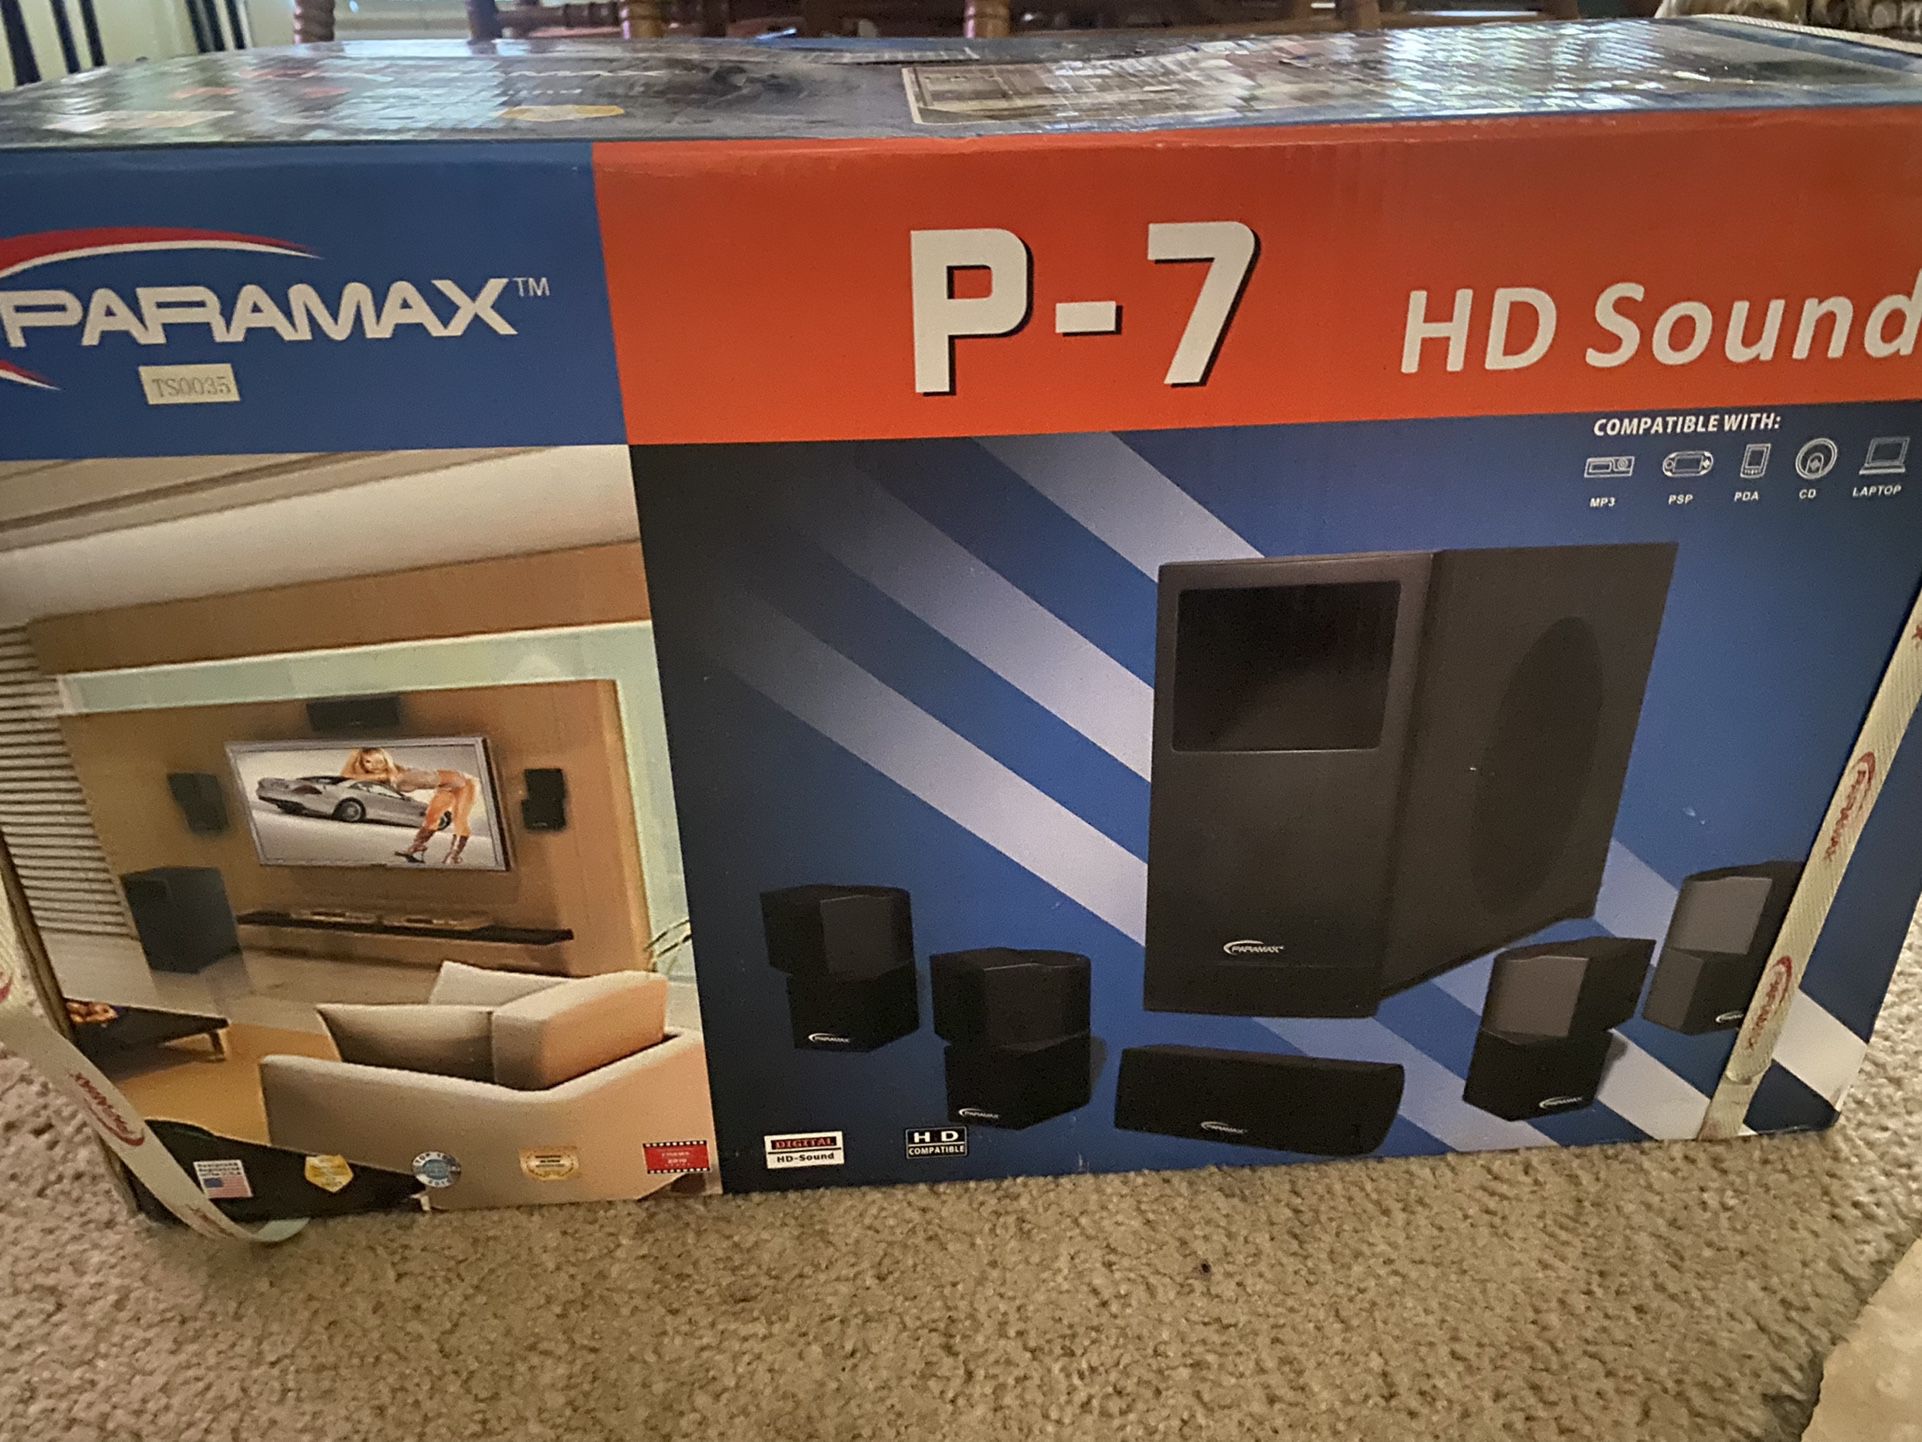 Paramax p-7 hd sound system